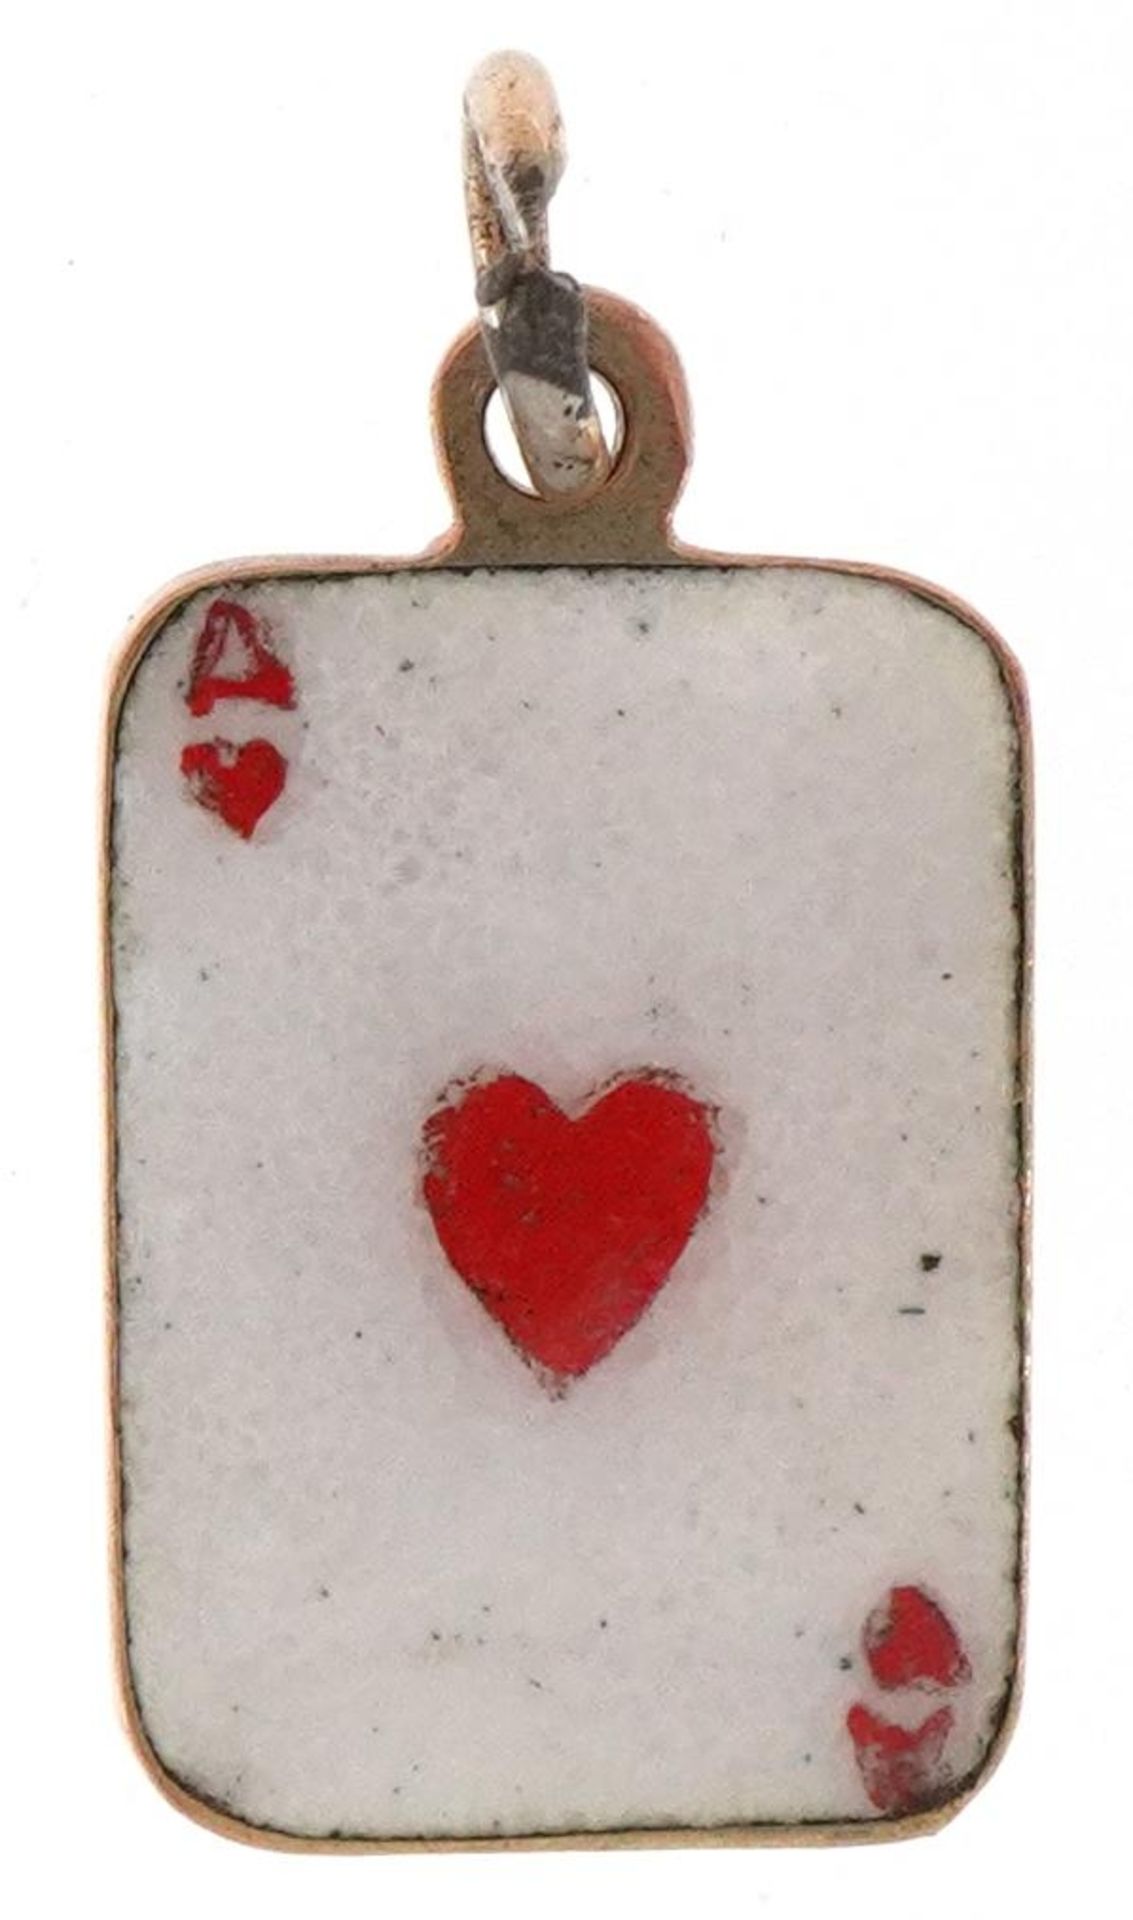 9ct gold and enamel charm in the form of ace of hearts playing card, 1.5cm high, 1.0g